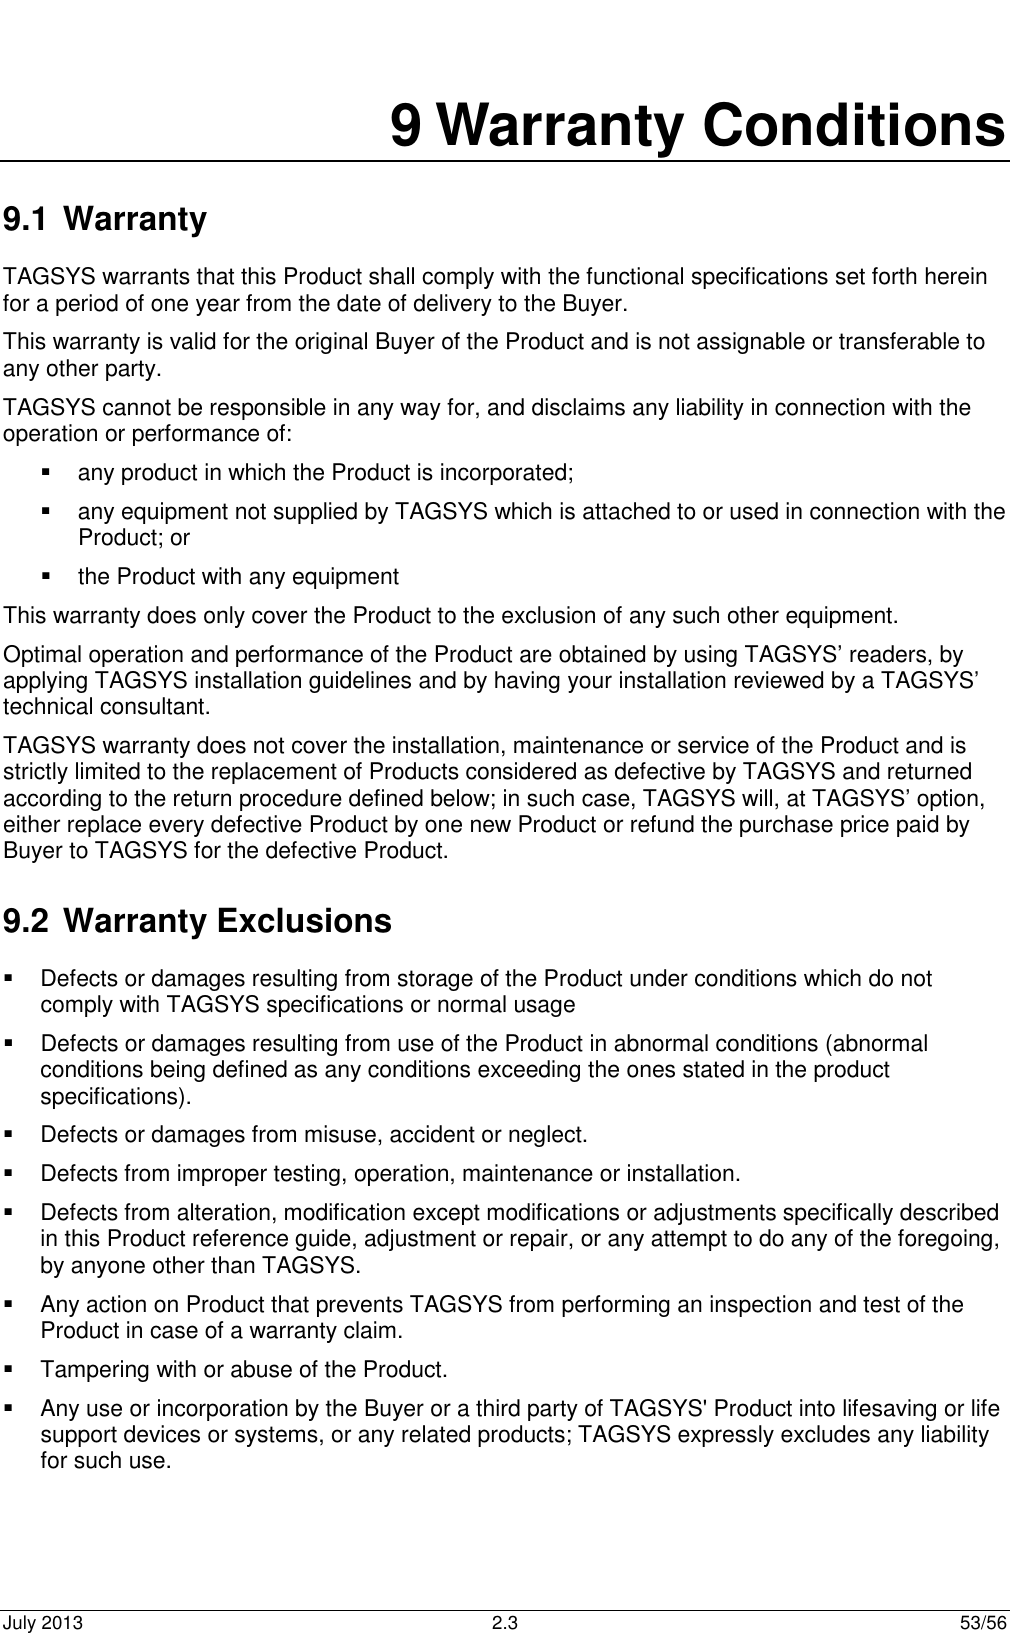  July 2013  2.3  53/56  9 Warranty Conditions 9.1 Warranty TAGSYS warrants that this Product shall comply with the functional specifications set forth herein for a period of one year from the date of delivery to the Buyer. This warranty is valid for the original Buyer of the Product and is not assignable or transferable to any other party. TAGSYS cannot be responsible in any way for, and disclaims any liability in connection with the operation or performance of:   any product in which the Product is incorporated;   any equipment not supplied by TAGSYS which is attached to or used in connection with the Product; or   the Product with any equipment This warranty does only cover the Product to the exclusion of any such other equipment. Optimal operation and performance of the Product are obtained by using TAGSYS’ readers, by applying TAGSYS installation guidelines and by having your installation reviewed by a TAGSYS’ technical consultant. TAGSYS warranty does not cover the installation, maintenance or service of the Product and is strictly limited to the replacement of Products considered as defective by TAGSYS and returned according to the return procedure defined below; in such case, TAGSYS will, at TAGSYS’ option, either replace every defective Product by one new Product or refund the purchase price paid by Buyer to TAGSYS for the defective Product. 9.2 Warranty Exclusions   Defects or damages resulting from storage of the Product under conditions which do not comply with TAGSYS specifications or normal usage   Defects or damages resulting from use of the Product in abnormal conditions (abnormal conditions being defined as any conditions exceeding the ones stated in the product specifications).   Defects or damages from misuse, accident or neglect.   Defects from improper testing, operation, maintenance or installation.   Defects from alteration, modification except modifications or adjustments specifically described in this Product reference guide, adjustment or repair, or any attempt to do any of the foregoing, by anyone other than TAGSYS.   Any action on Product that prevents TAGSYS from performing an inspection and test of the Product in case of a warranty claim.   Tampering with or abuse of the Product.   Any use or incorporation by the Buyer or a third party of TAGSYS&apos; Product into lifesaving or life support devices or systems, or any related products; TAGSYS expressly excludes any liability for such use. 